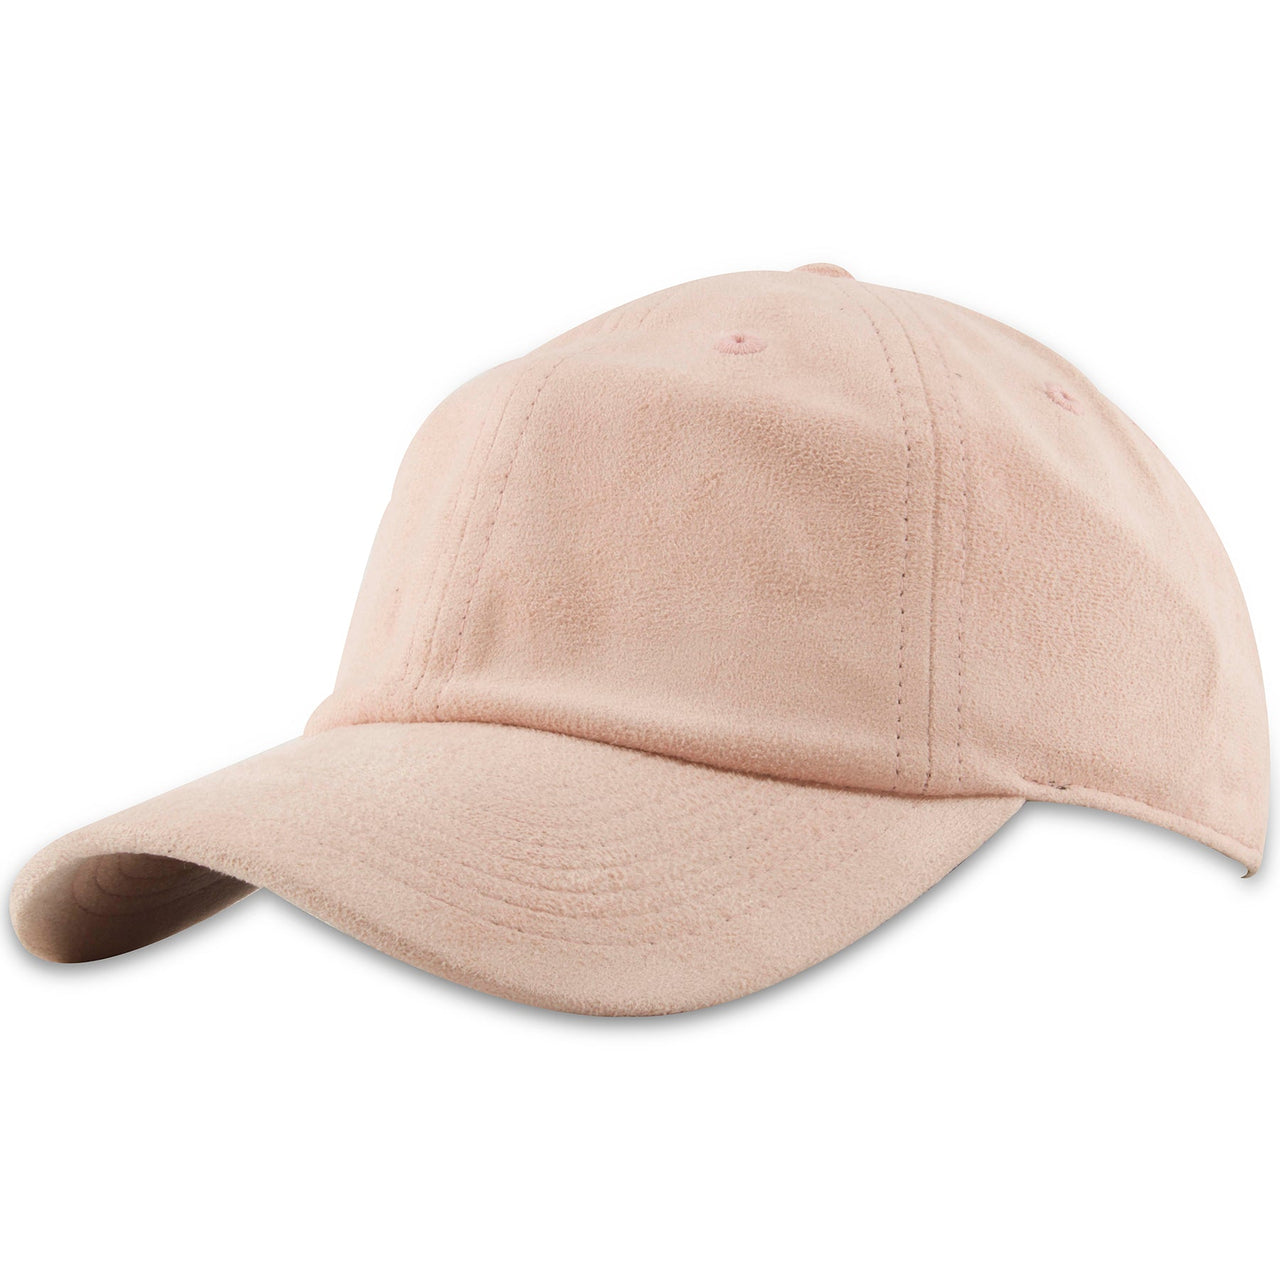 Peach Blank Suede Classic Adjustable Dad Hat